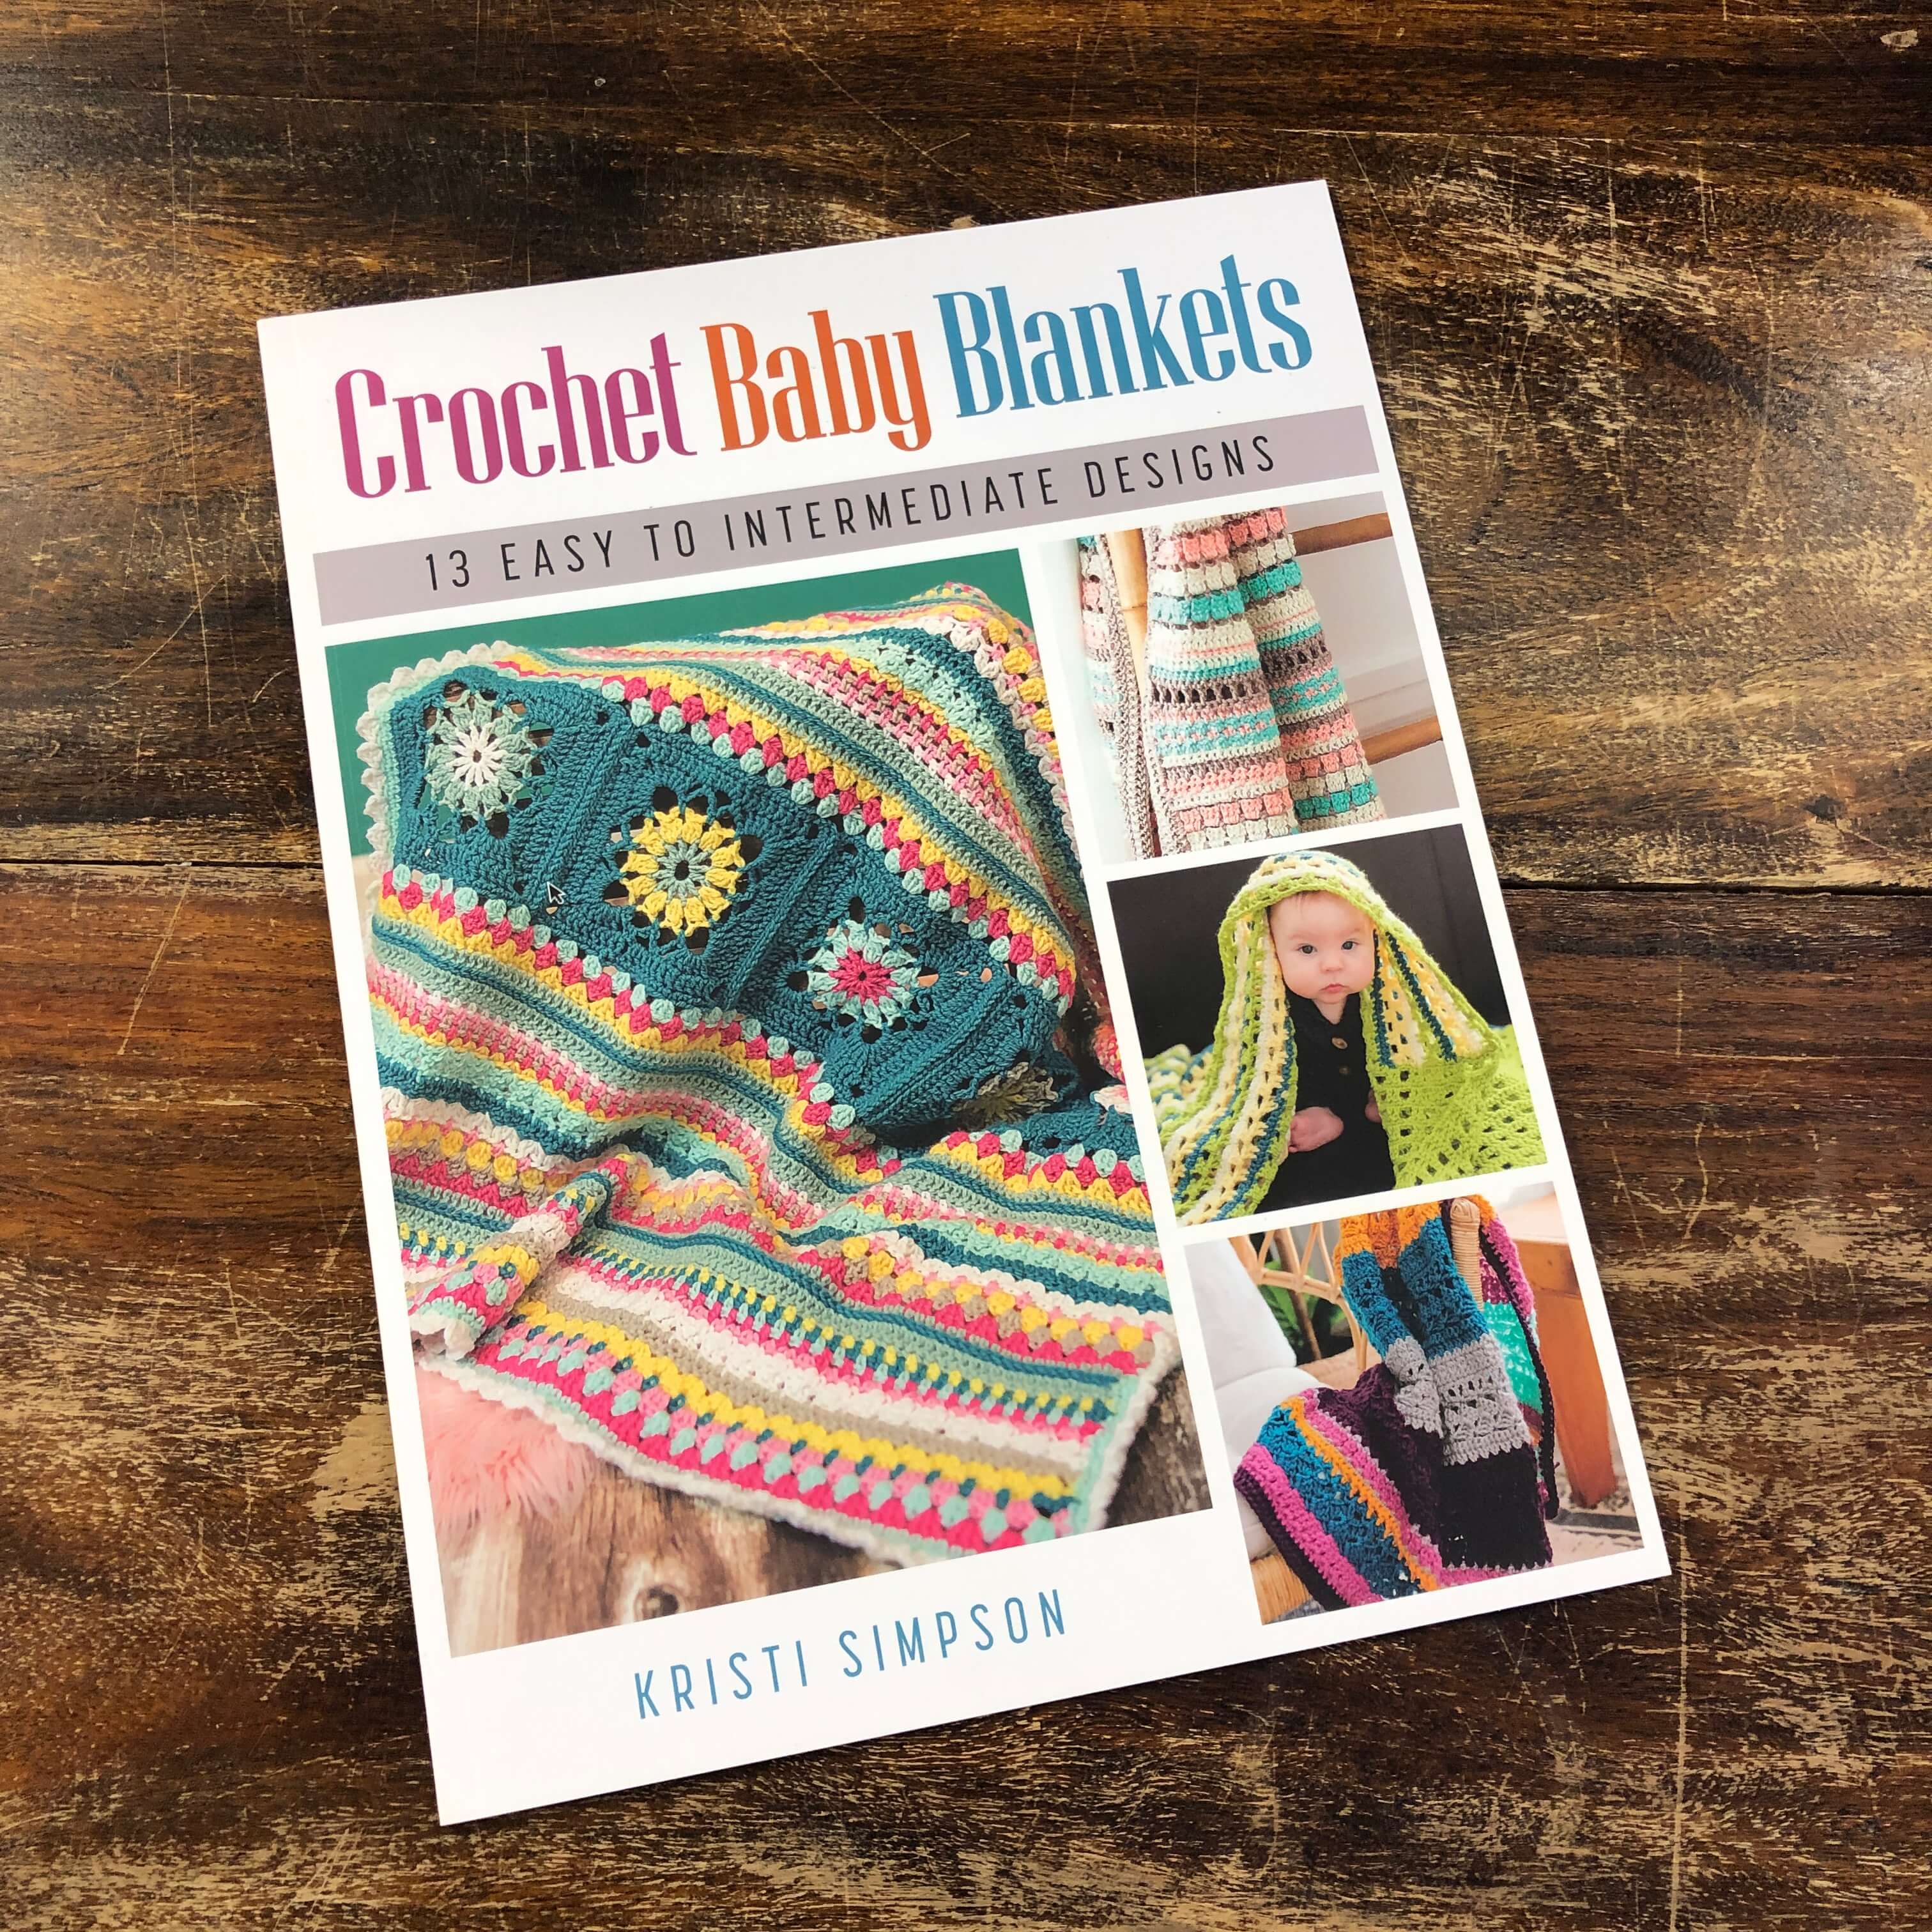 Mix and Match Modern Crochet Blankets: 100 Patterned and Textured Stripes for 1000s of Unique Throws [Book]